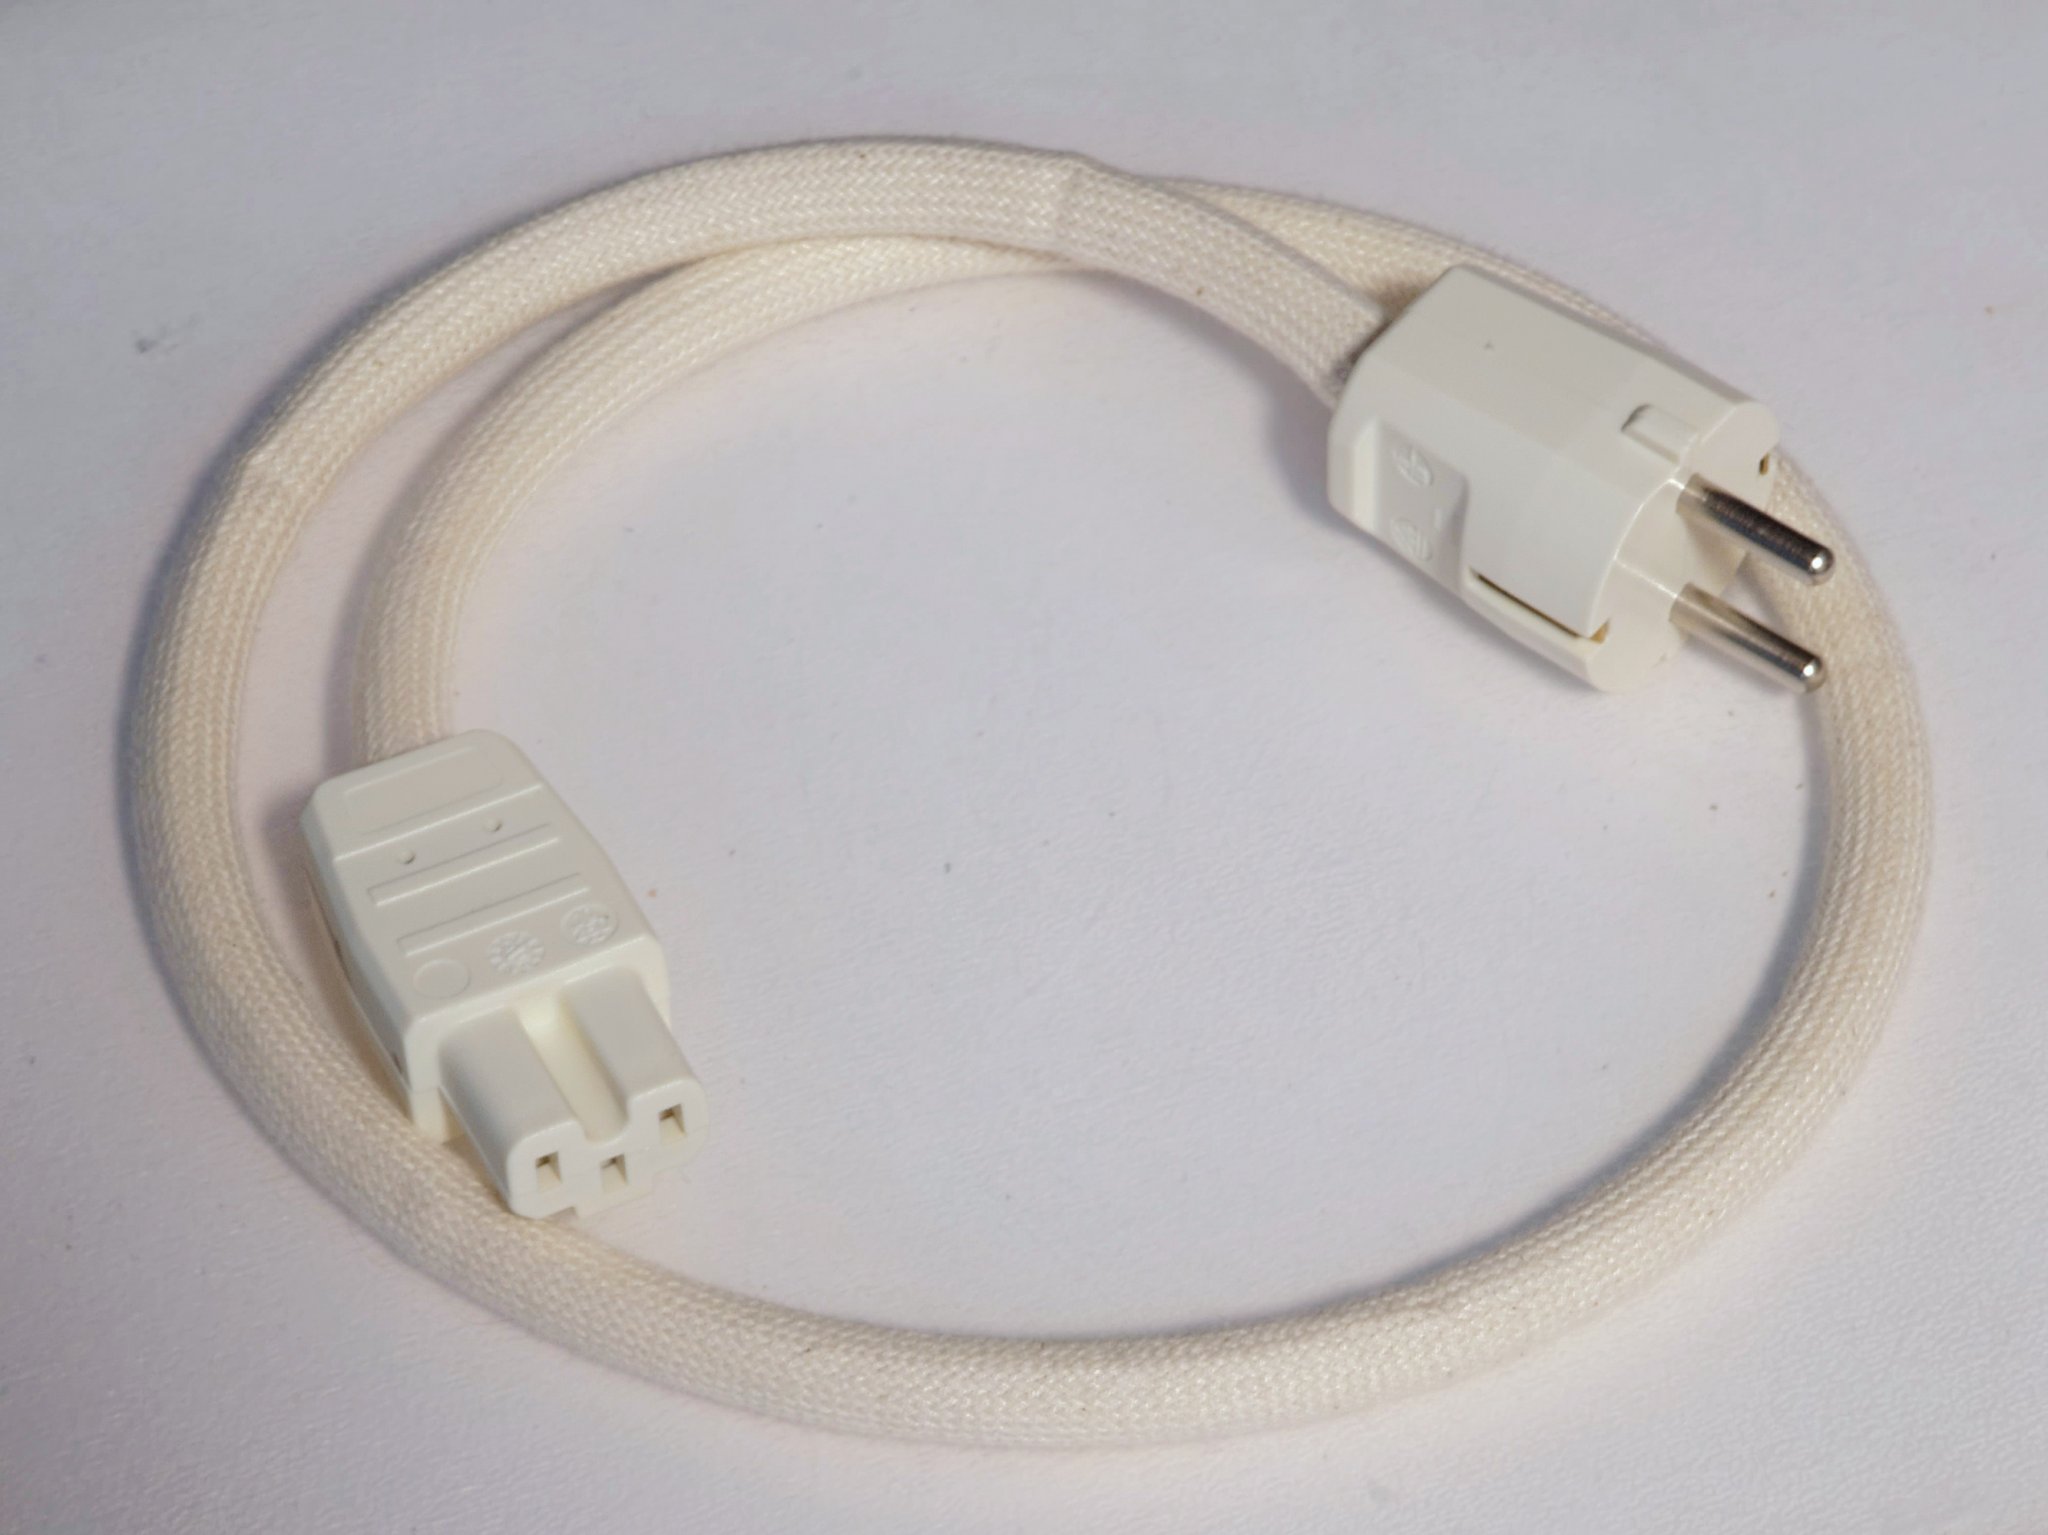 Device power cable white balance.jpg